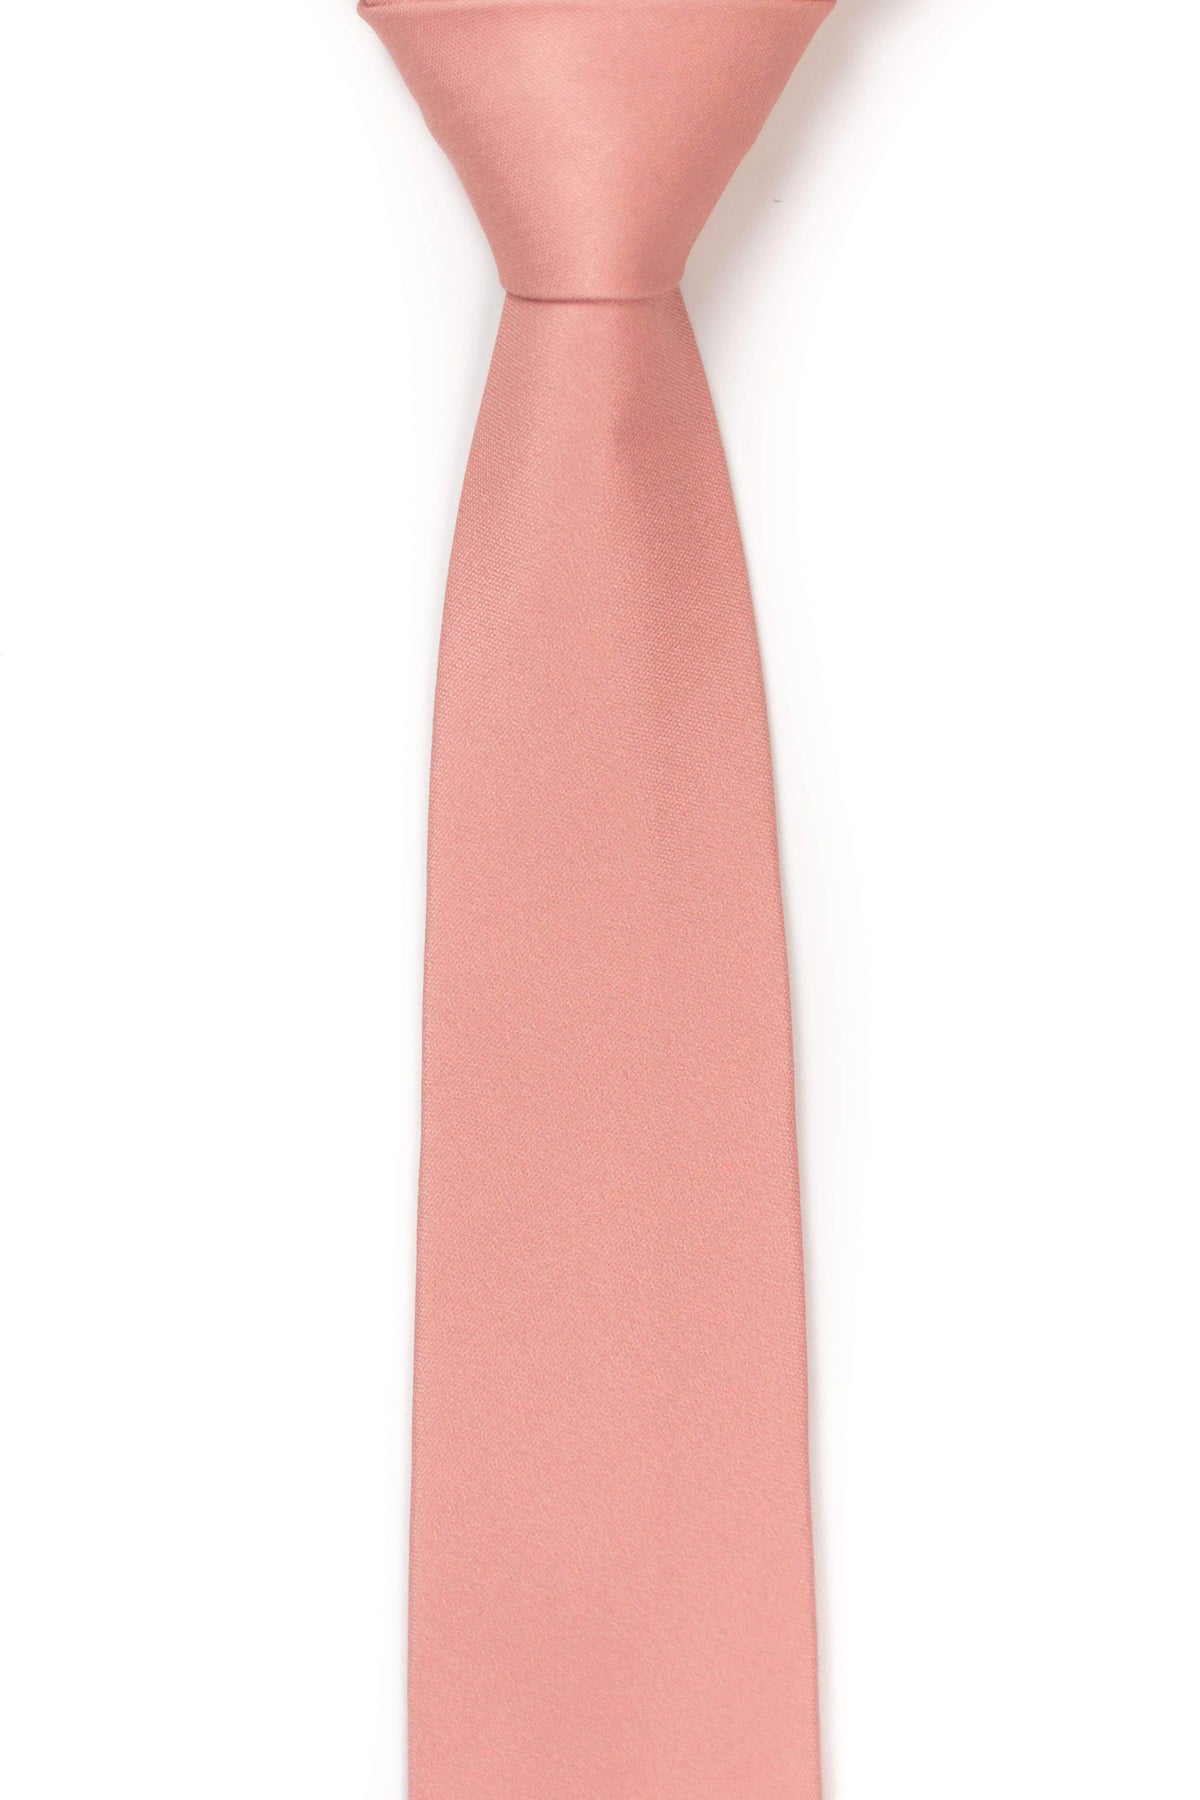 light peach tie from tough apparel front view